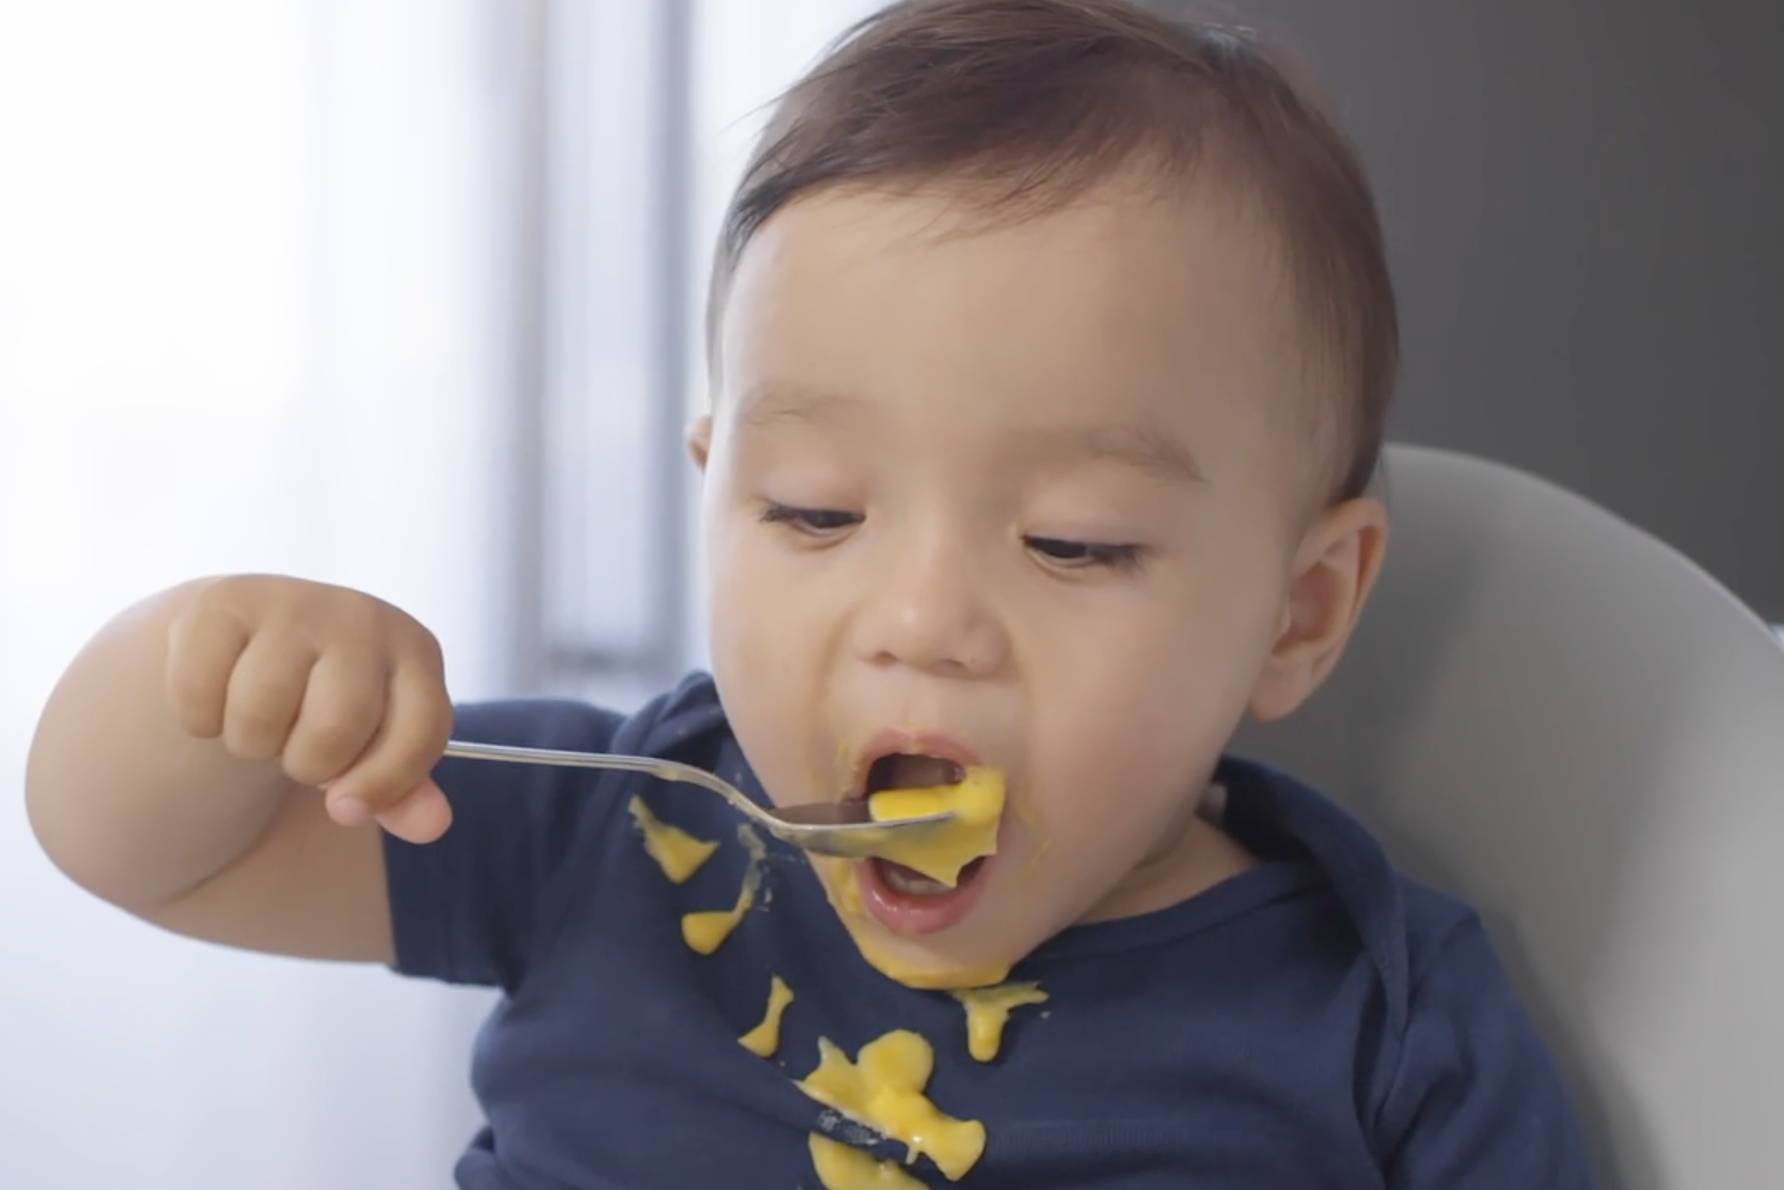 How to Train Baby to Use a Spoon - Solid Starts